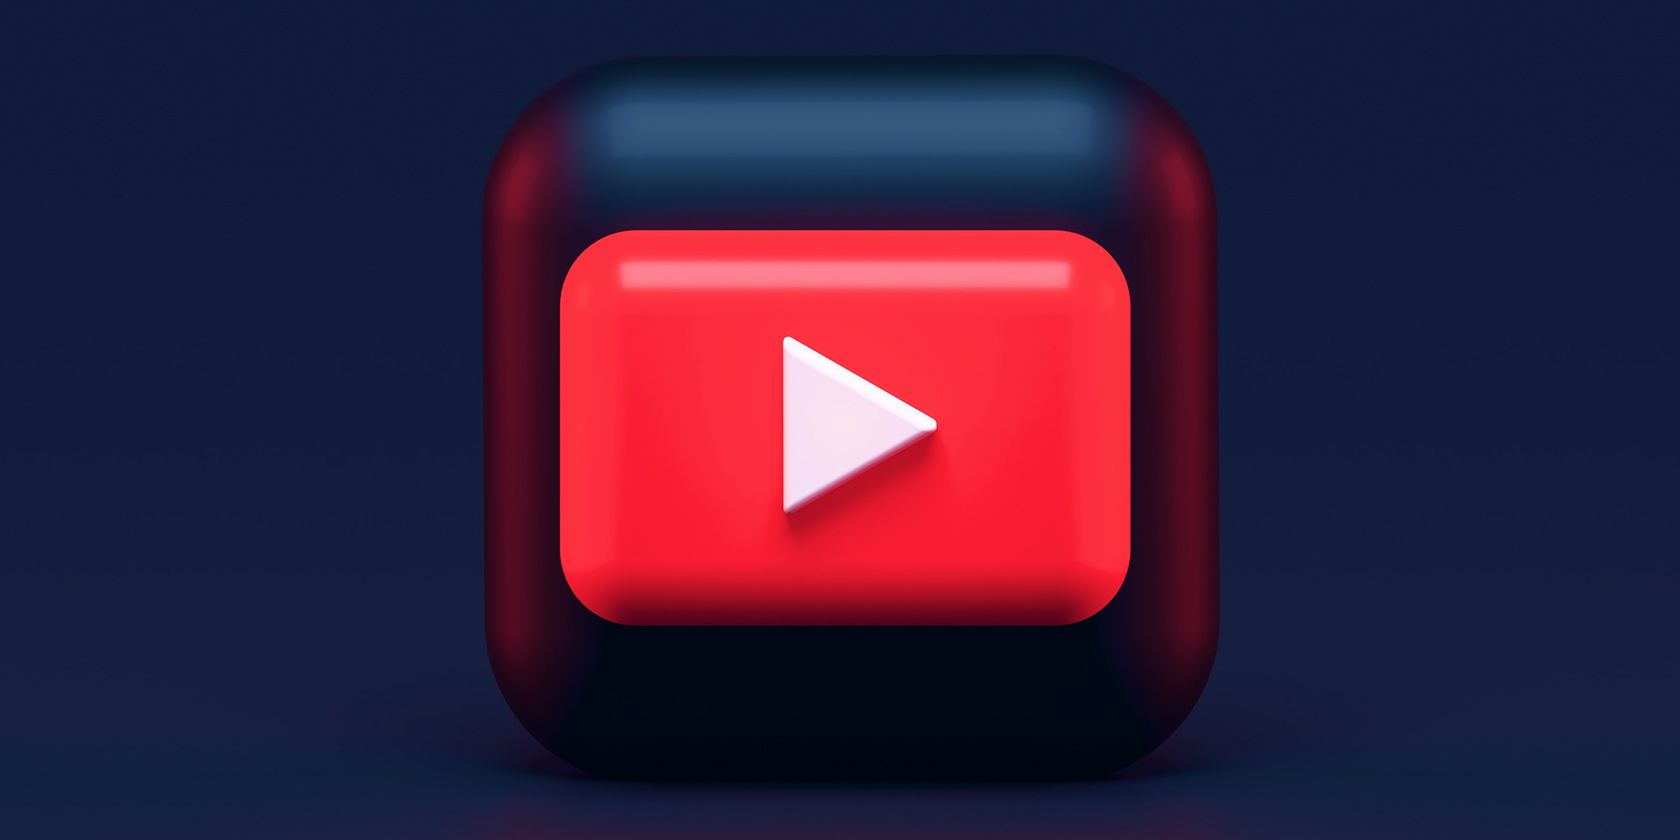 The YouTube logo over midnight blue background